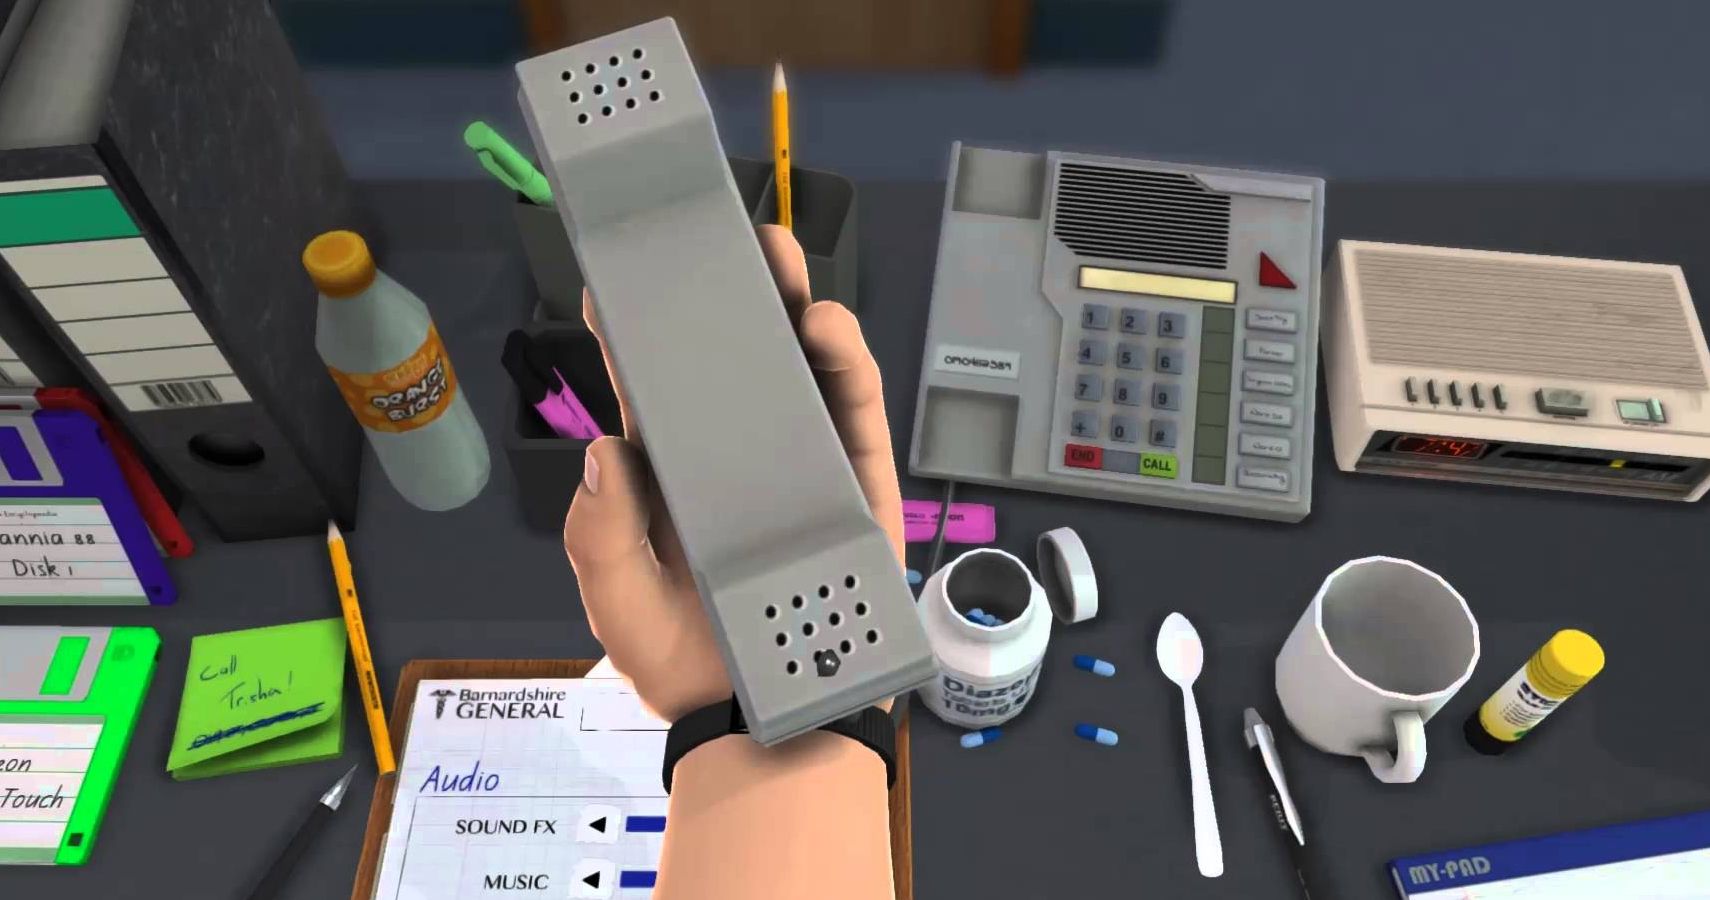 gaming-detail-surgeon-simulator-s-phone-will-call-you-in-real-life-and-unlock-a-secret-level